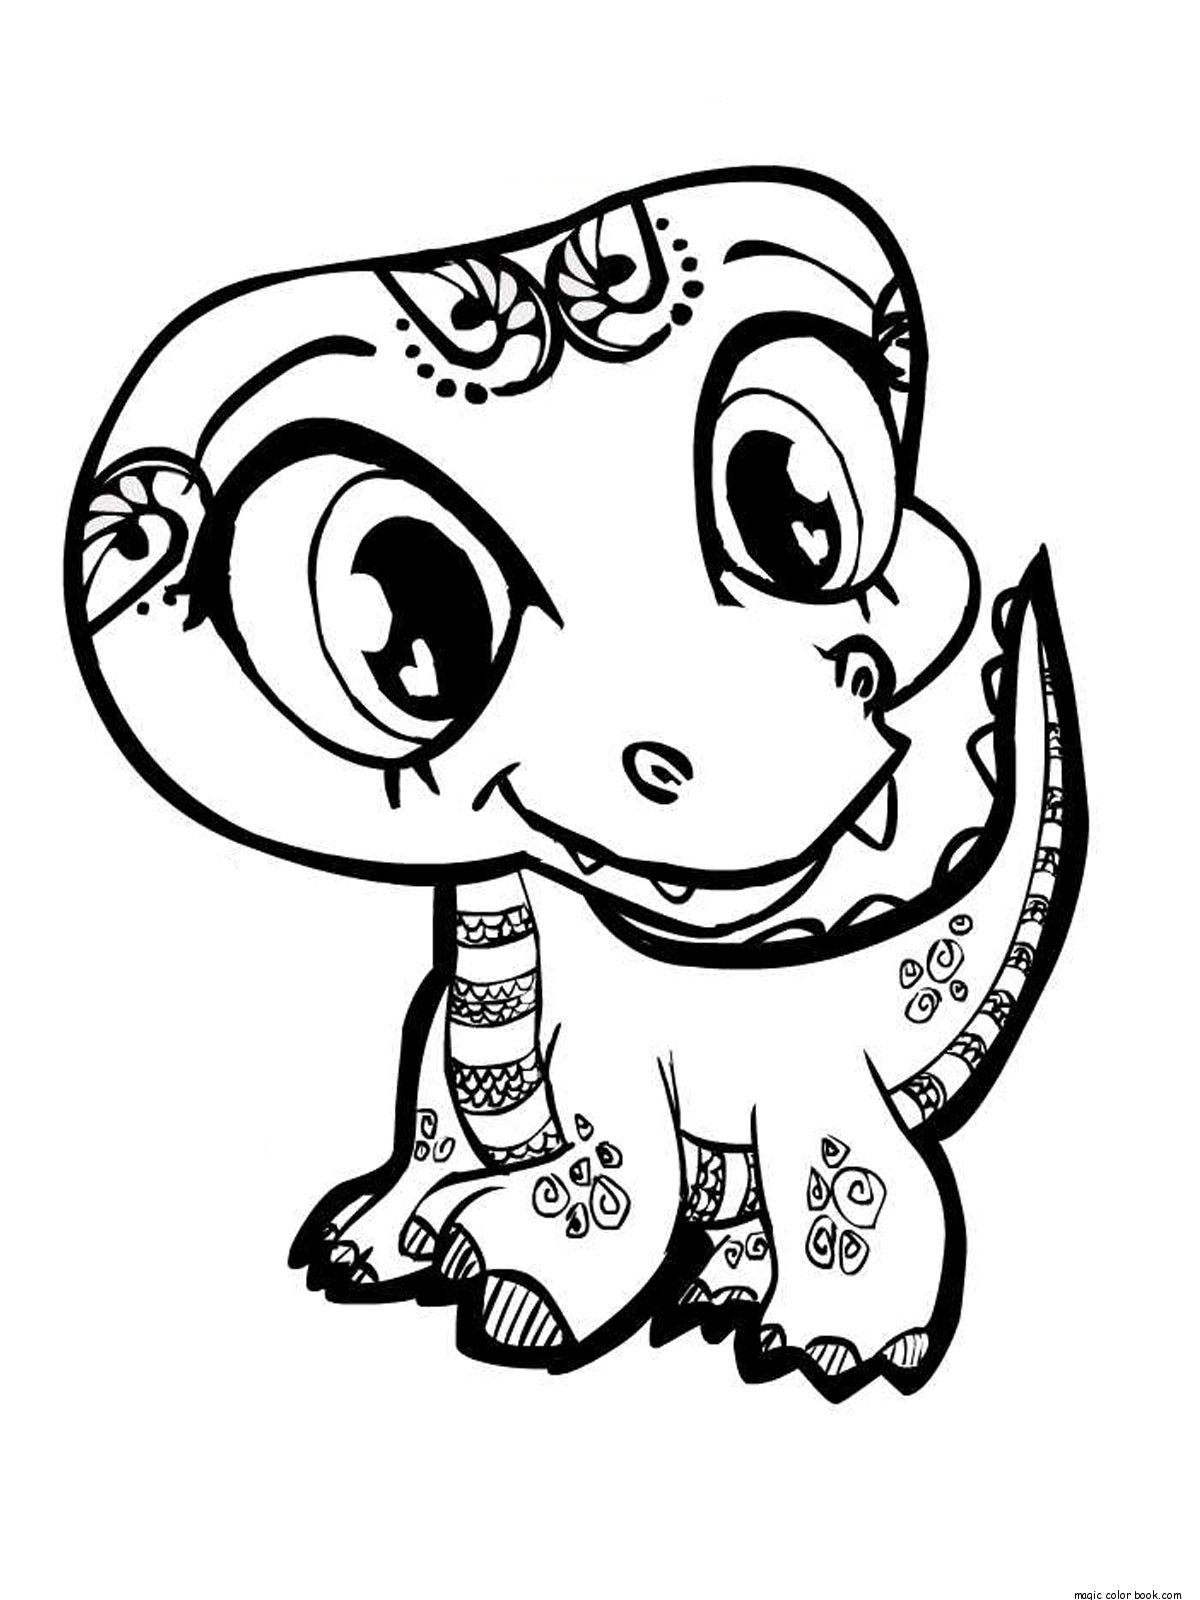 Dinosaur Fish Great Coloring Pages | Coloring pages wallpaper